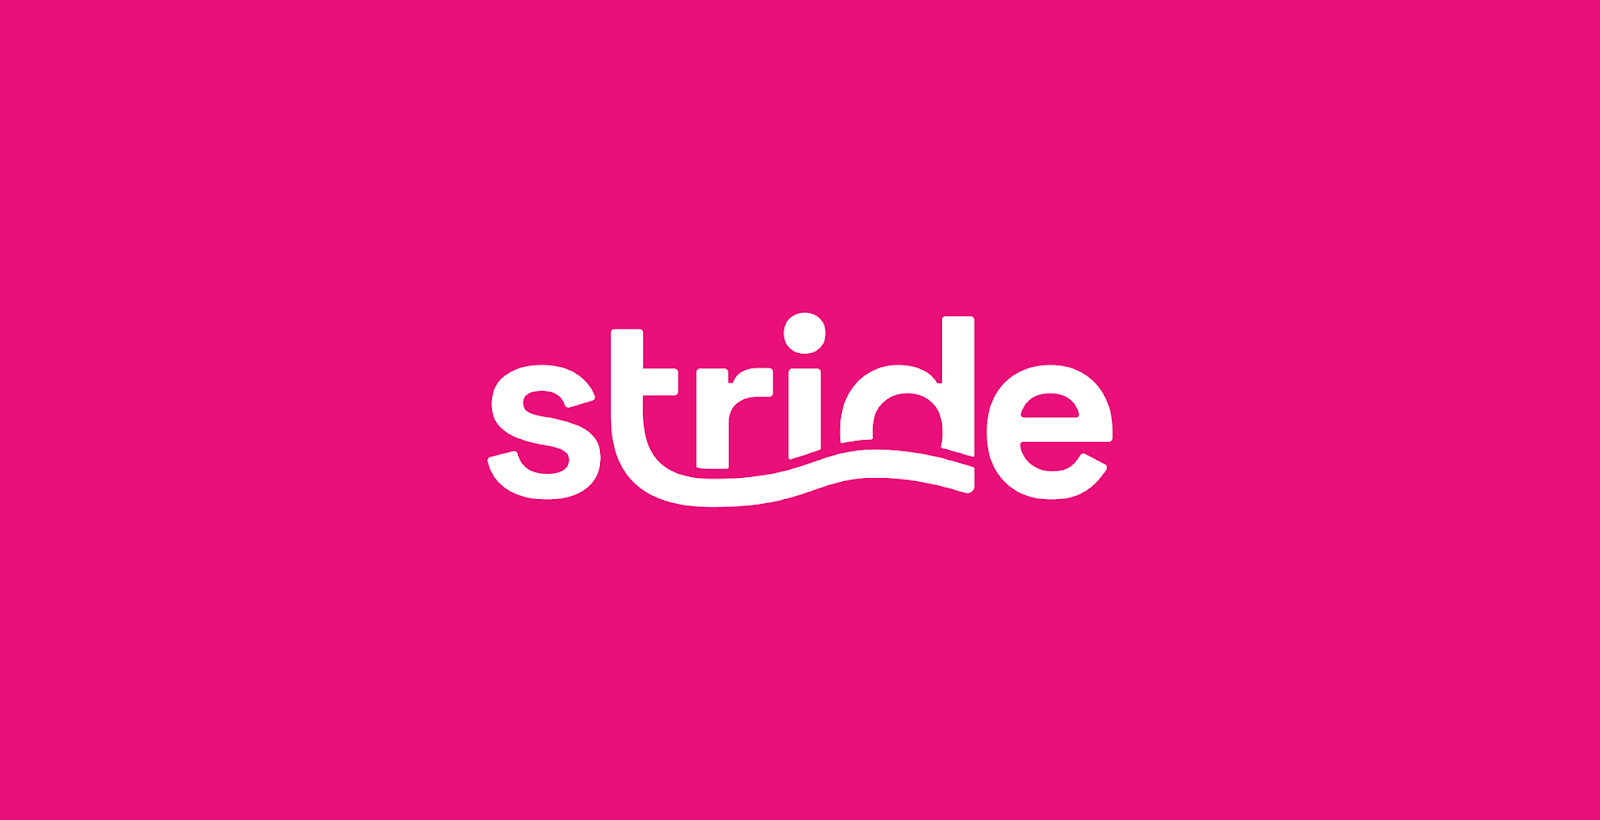 WIth liquid staking protocols like Lido Finance, Jito, and others garnering significant attention over the past years and months, platforms focused on the Cosmos ecosystem such as Stride and Persistence One seem underserved in the global crypto marketplace at this time. (Image Credit: Stride Tokenomics via Stride and the Medium blog)